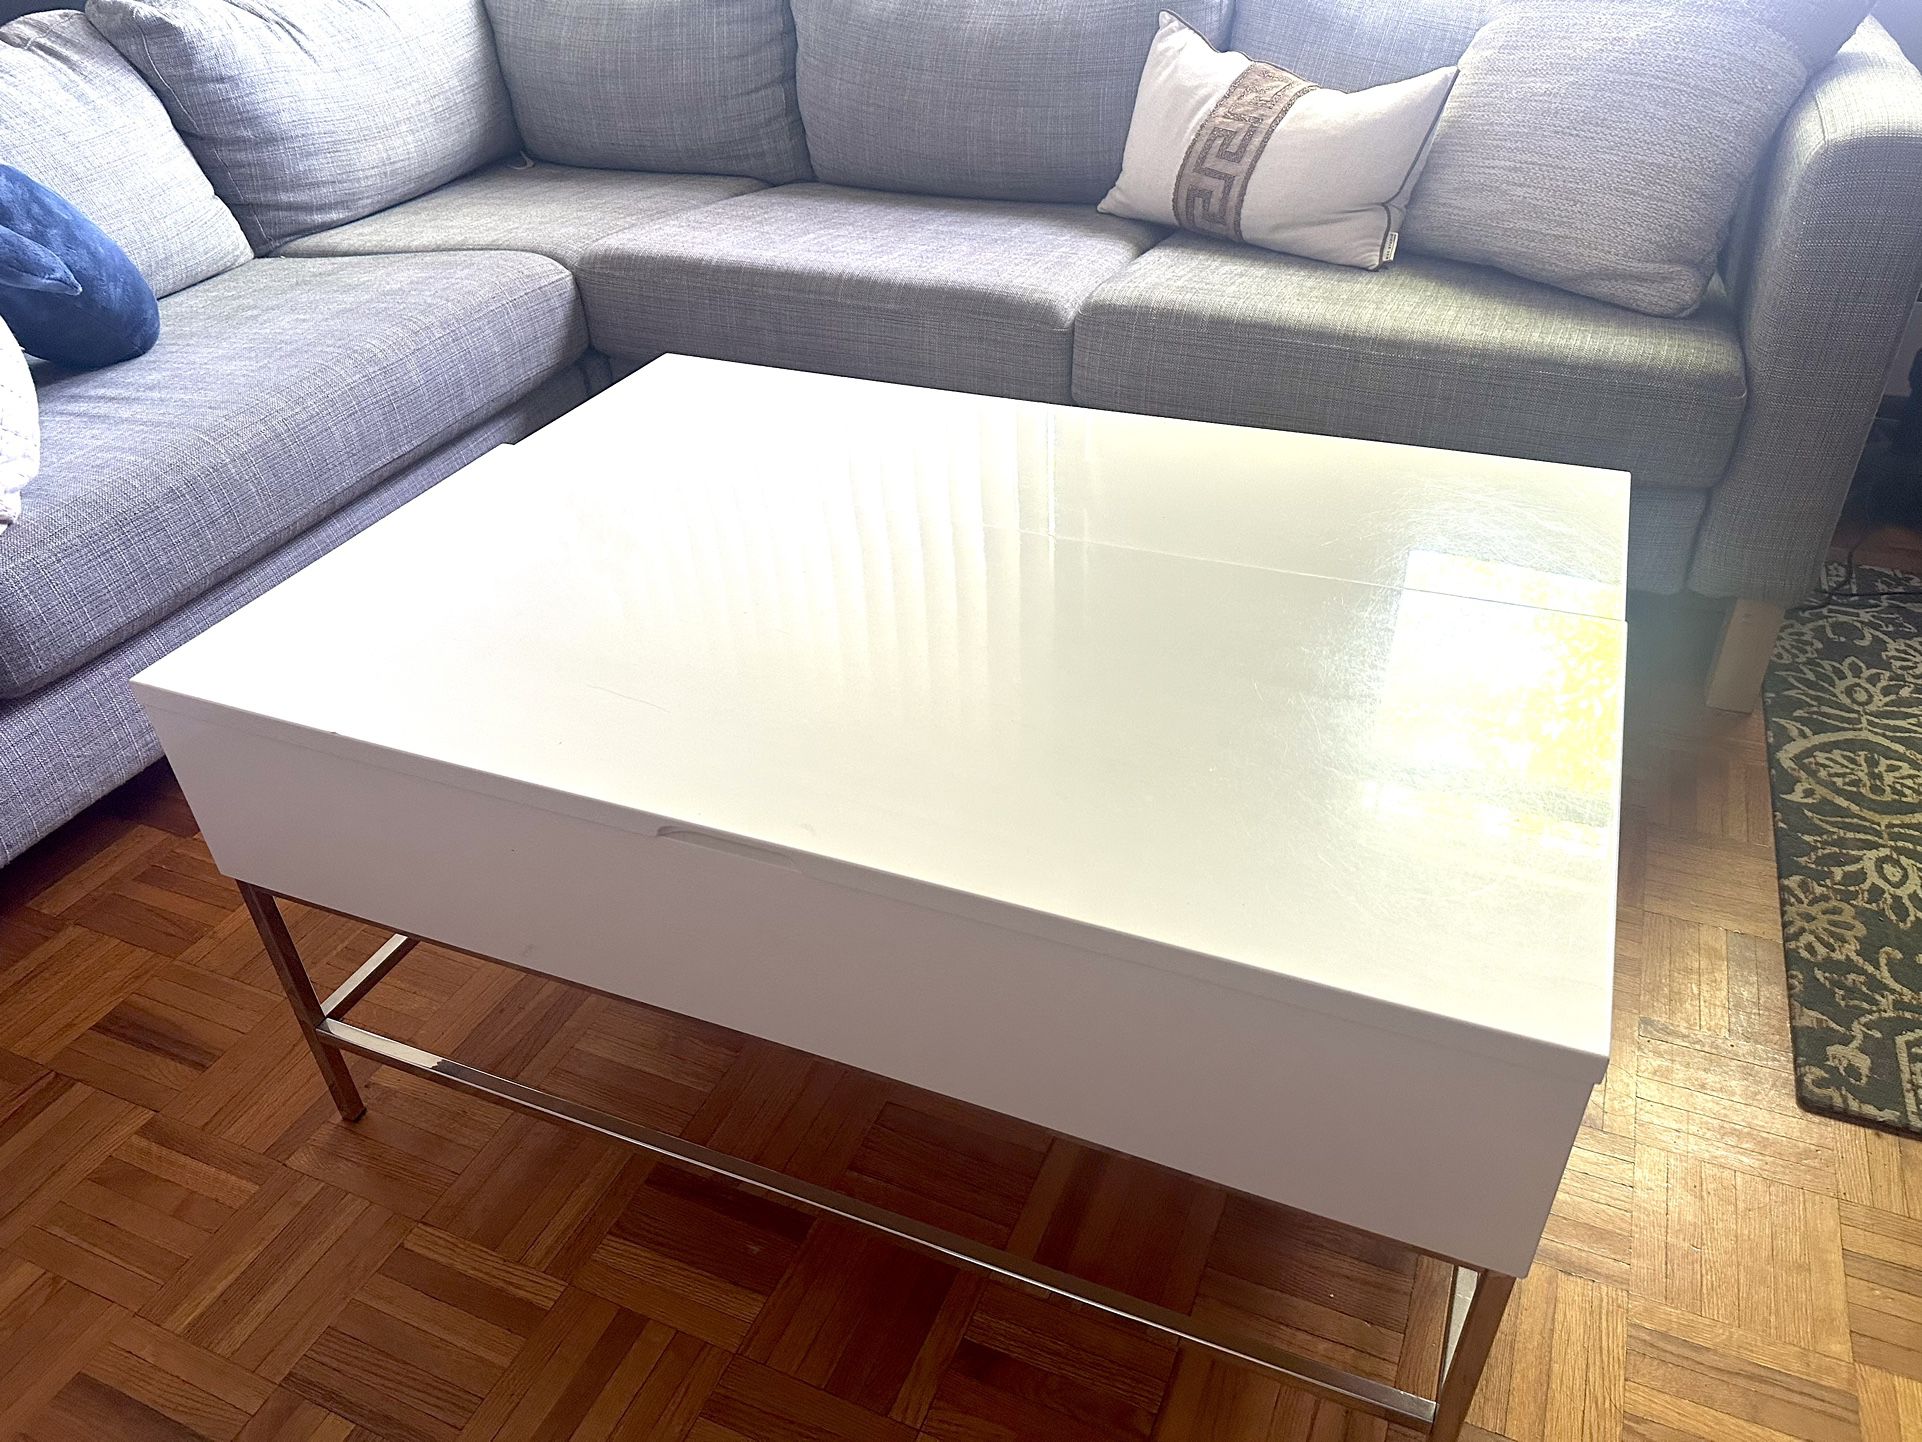 West Elm Pop Up Coffee Table